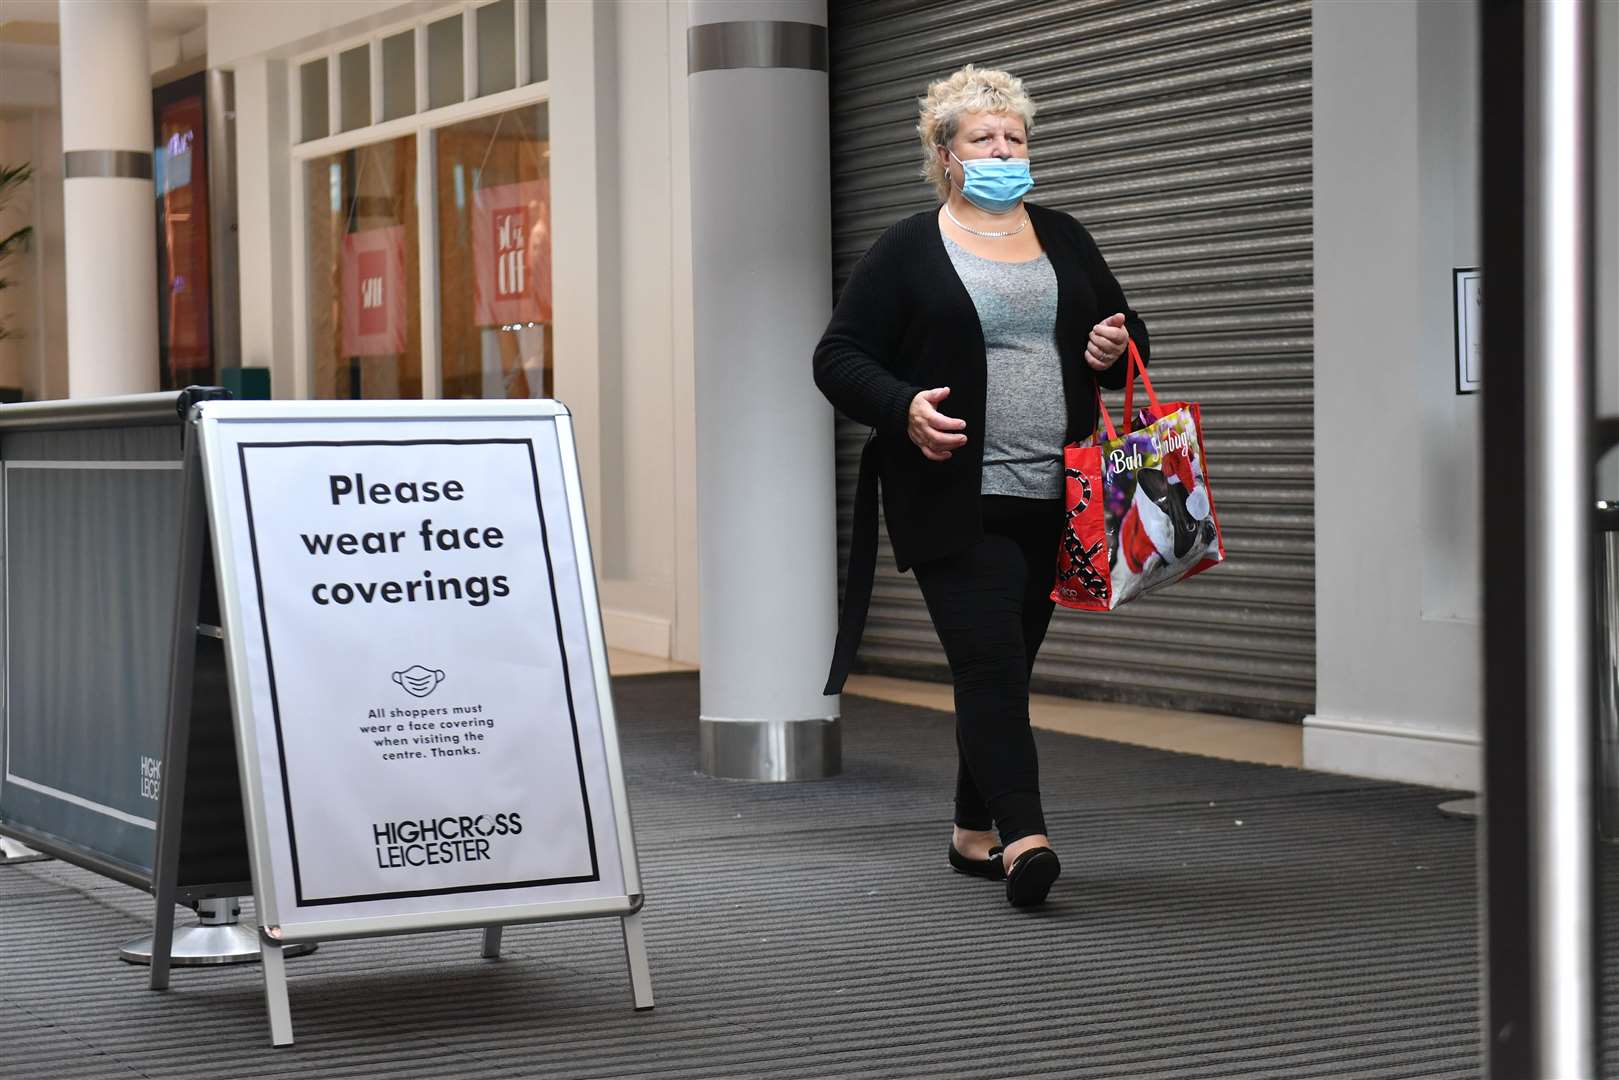 A shopper wearing a face mask leaves the Highcross shopping centre. (Jacob King/PA)